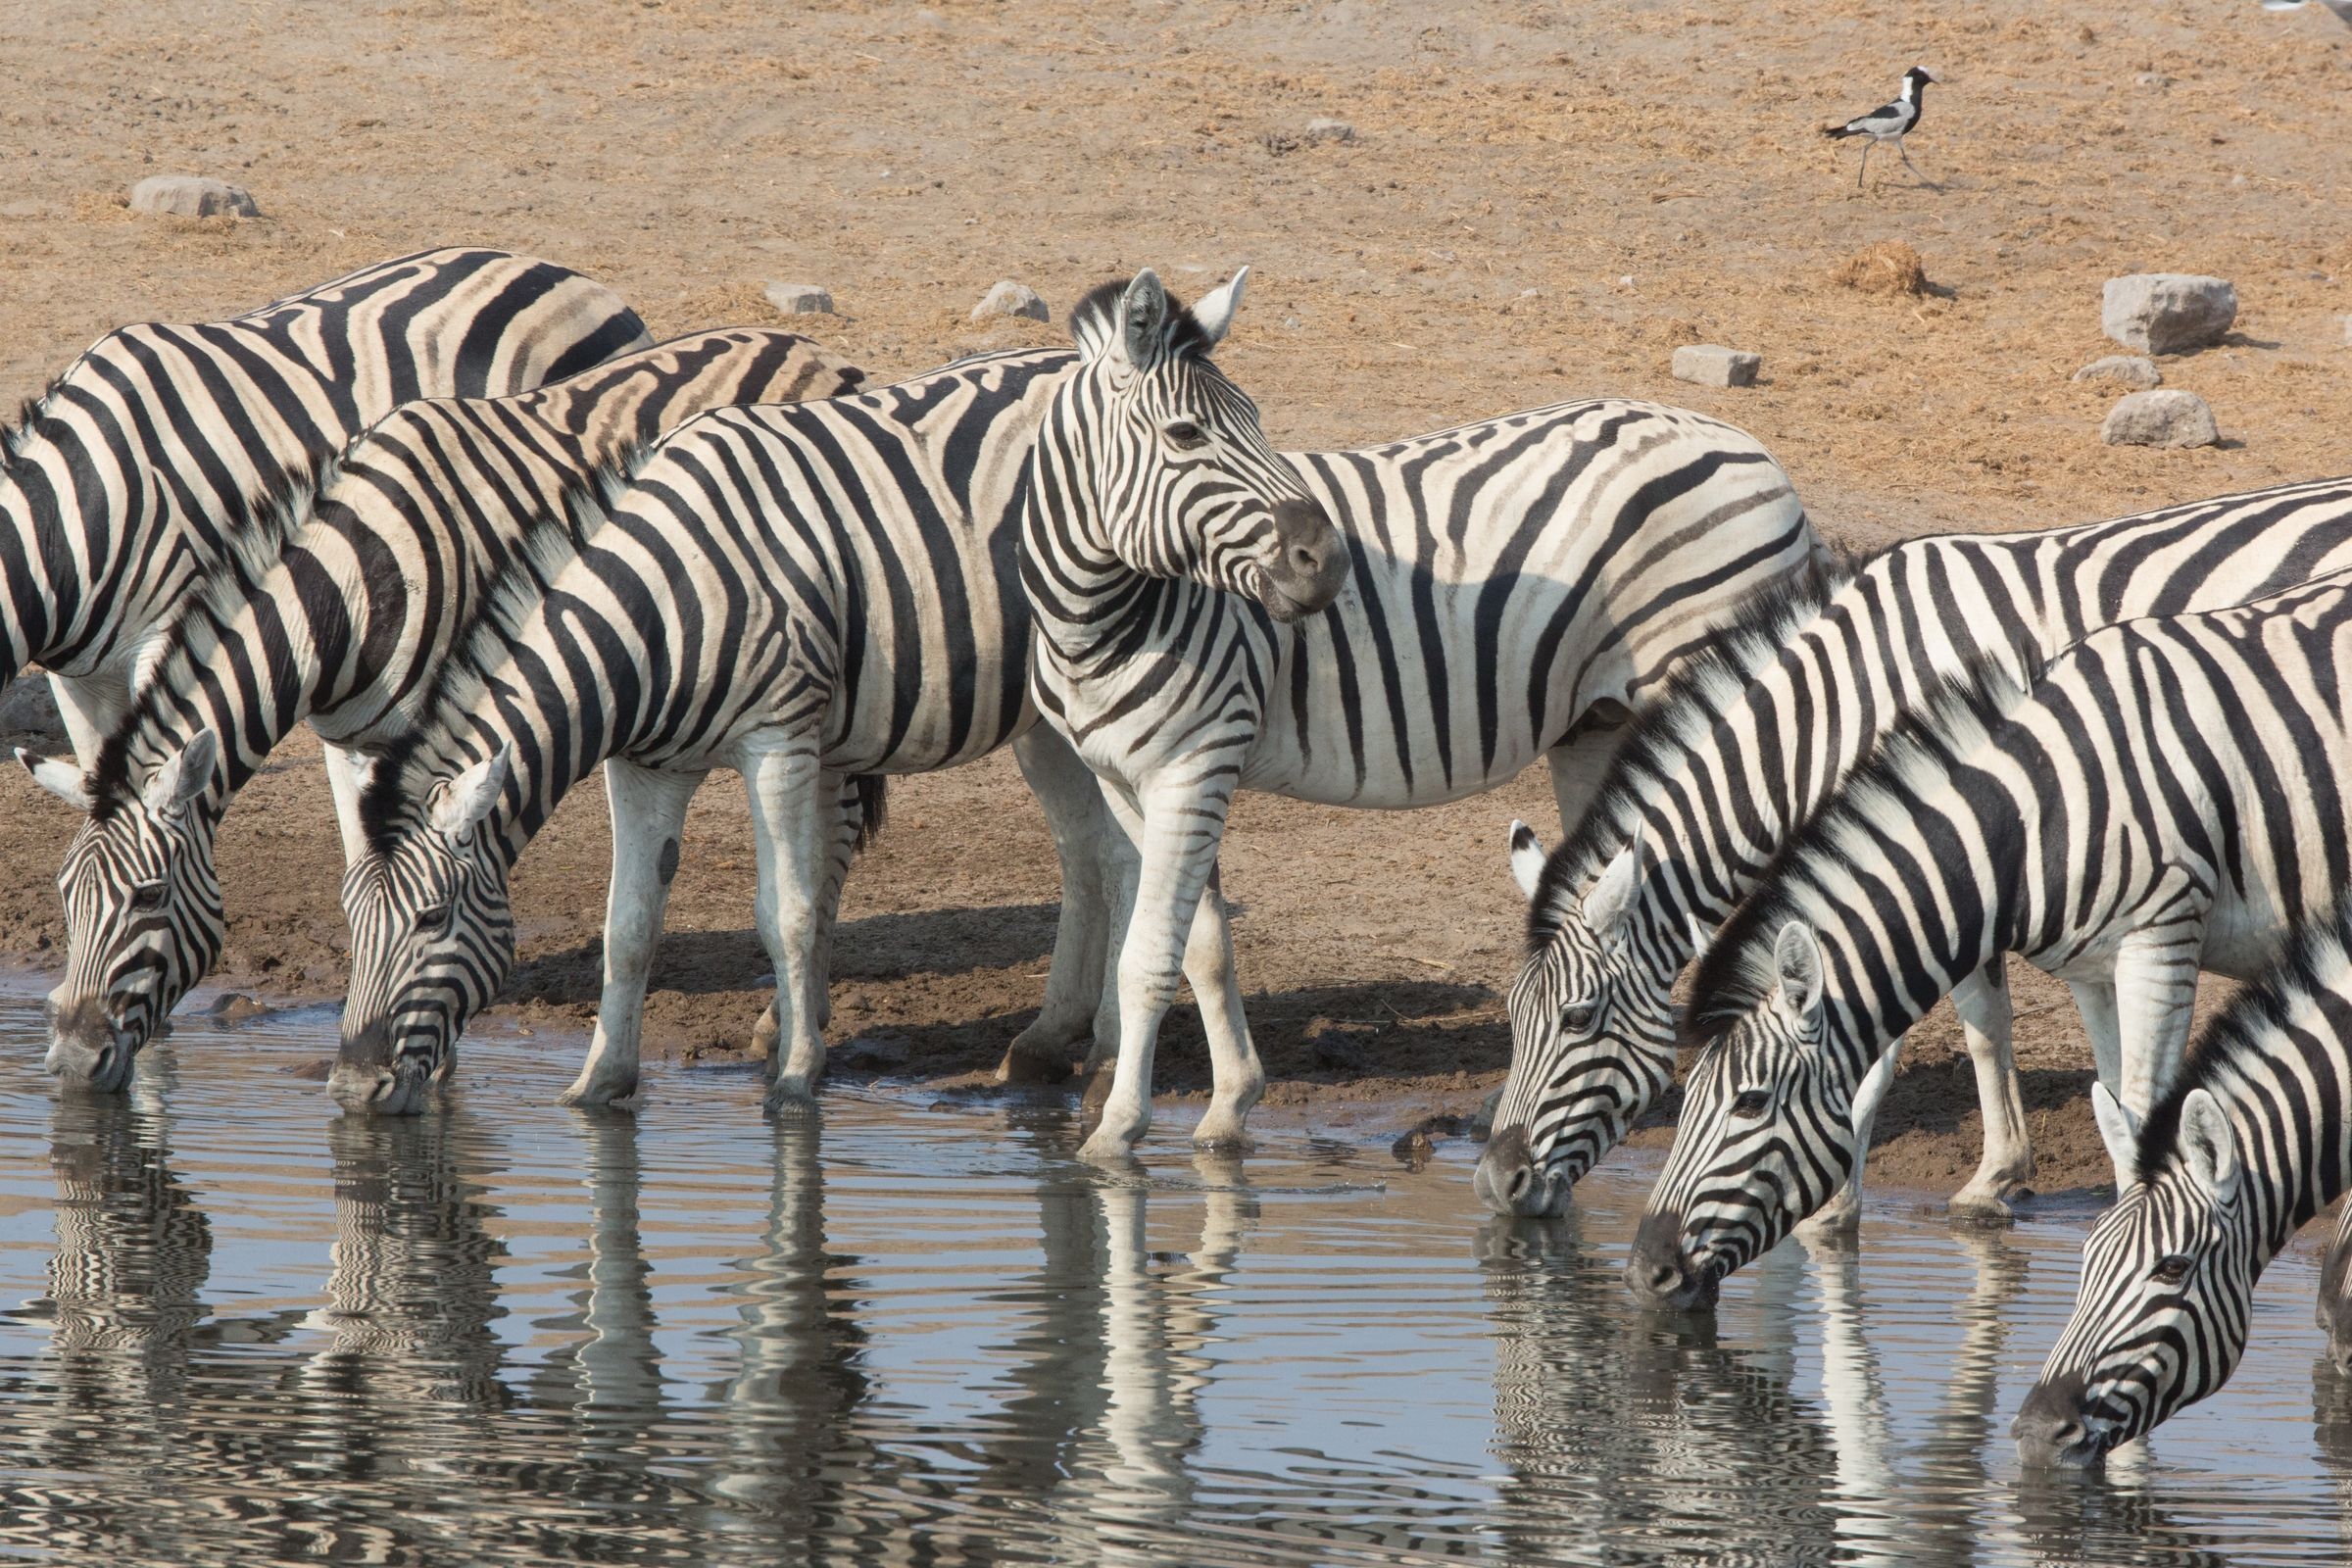 Etosha is the best place to photograph drinking zebras